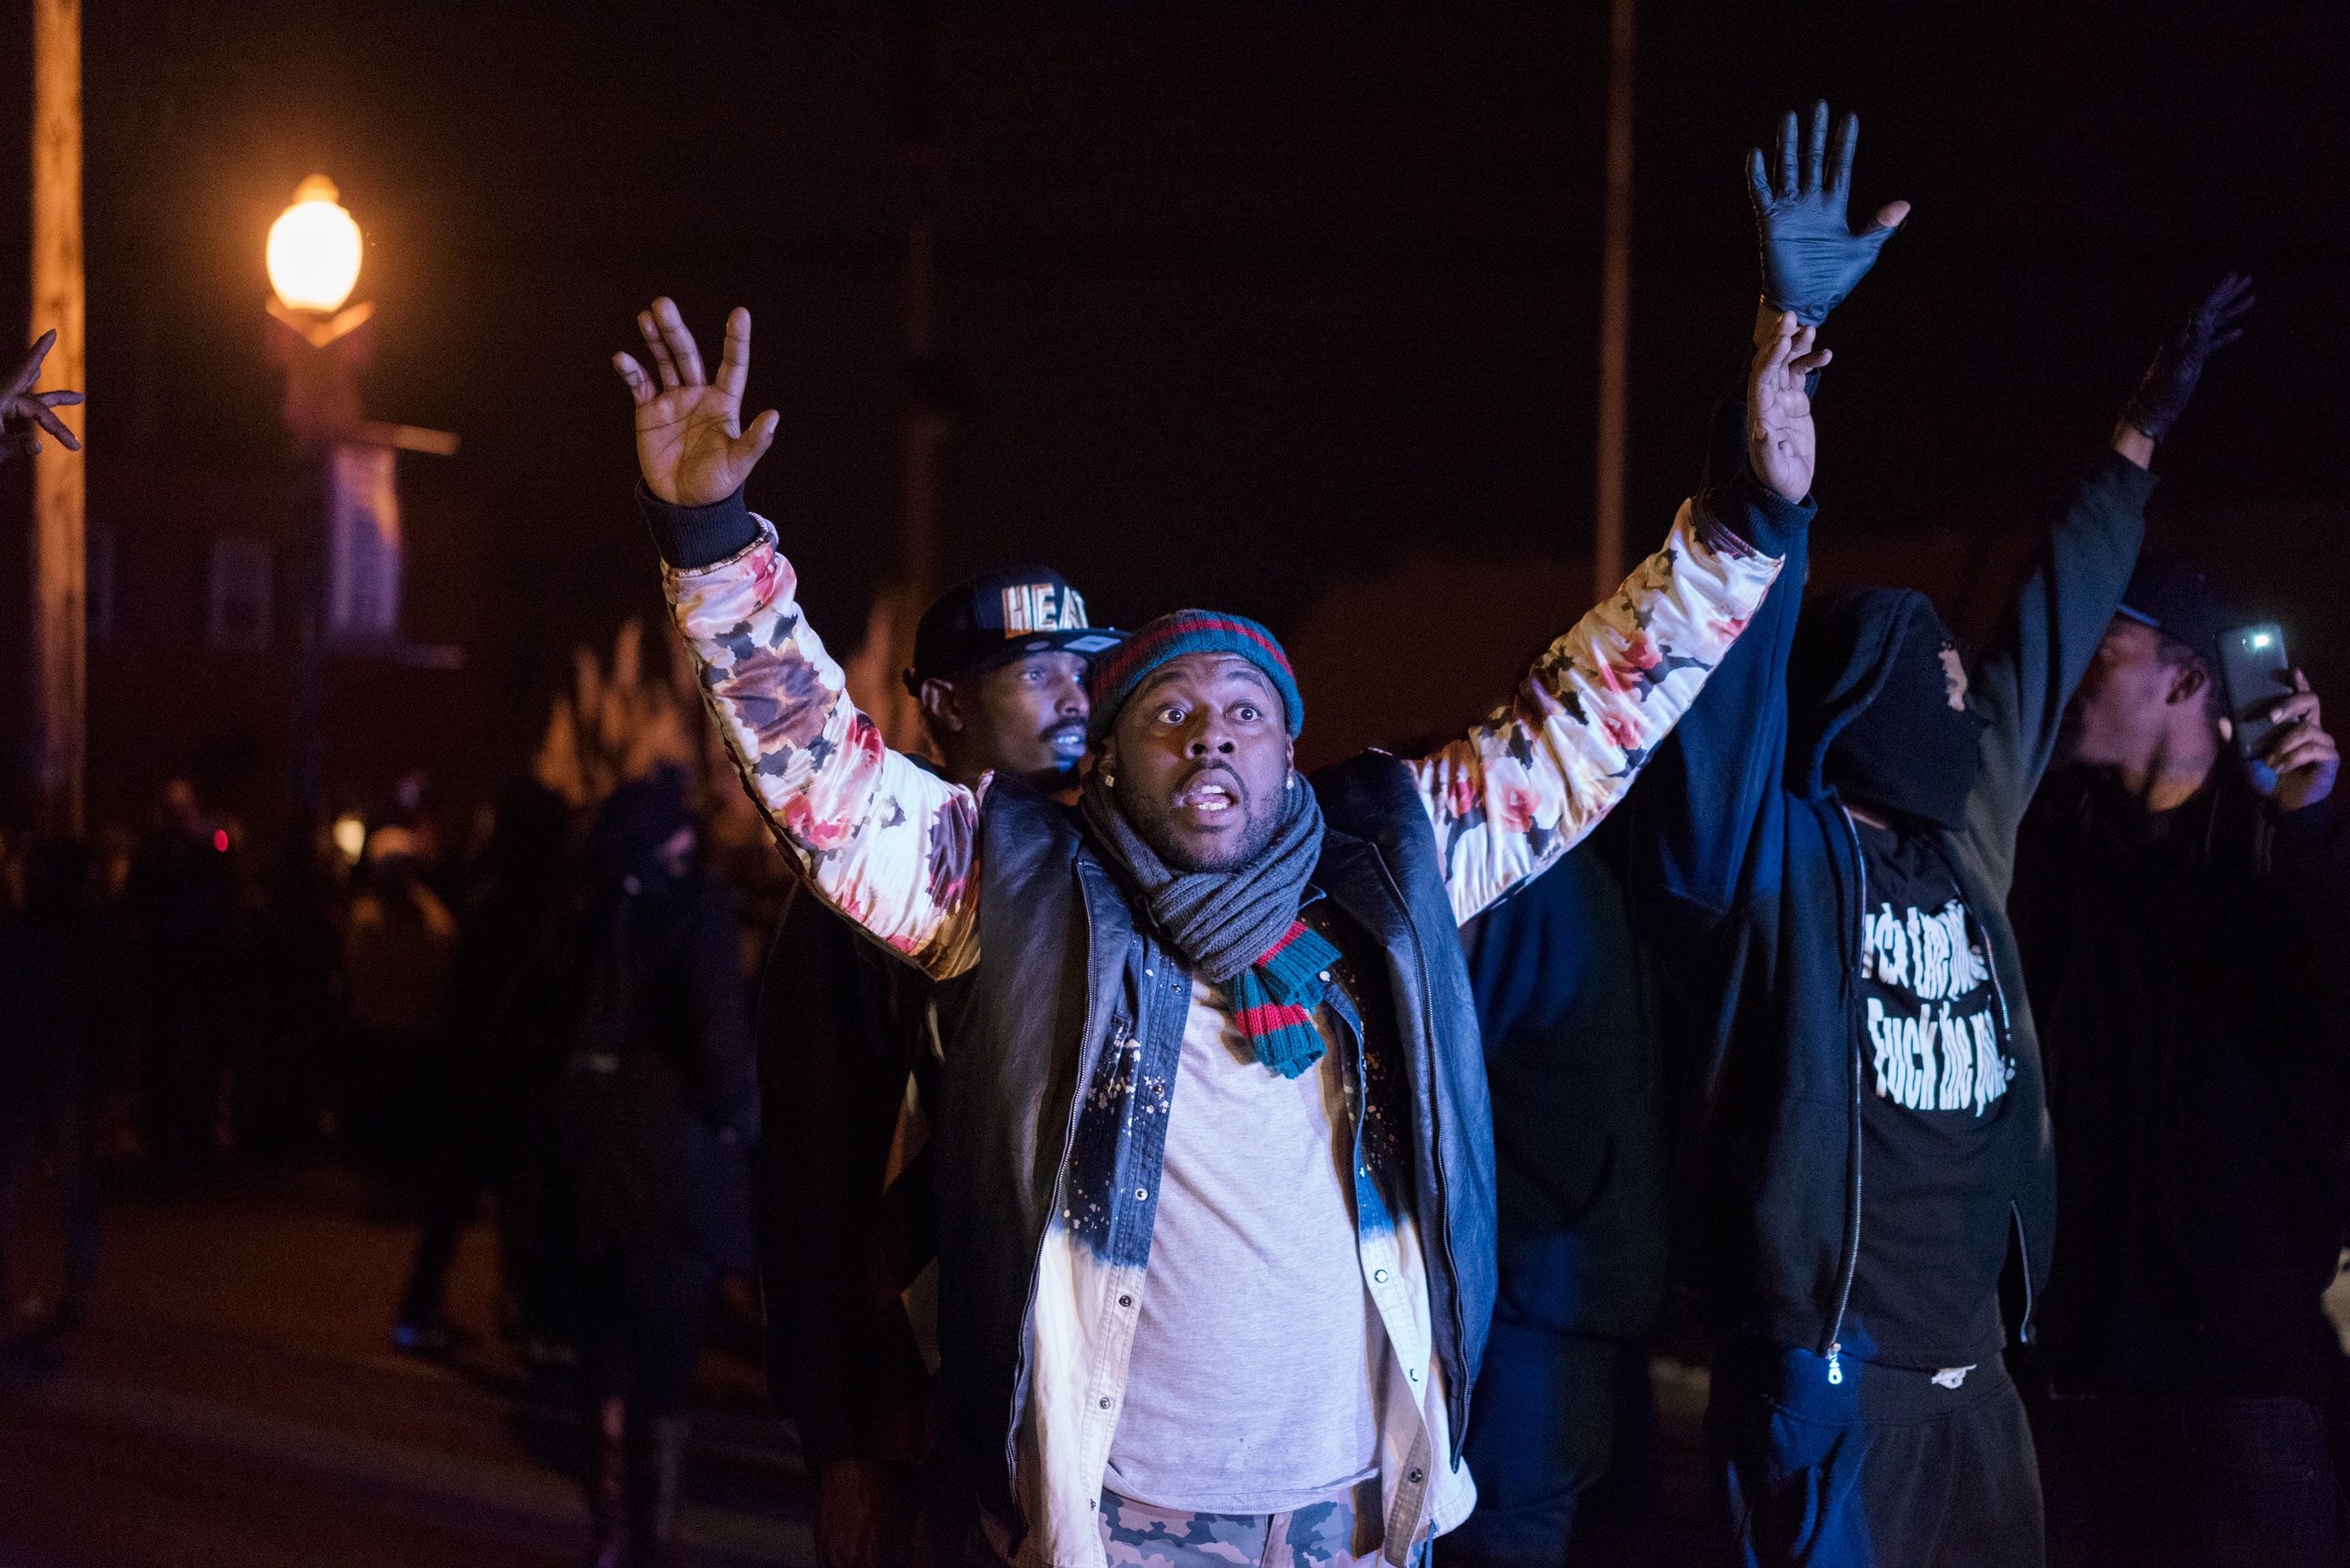 A demonstrator puts his hands in the air amid protests in Ferguson, Mo. on Nov. 24, 2014 (Barrett Emke for TIME)